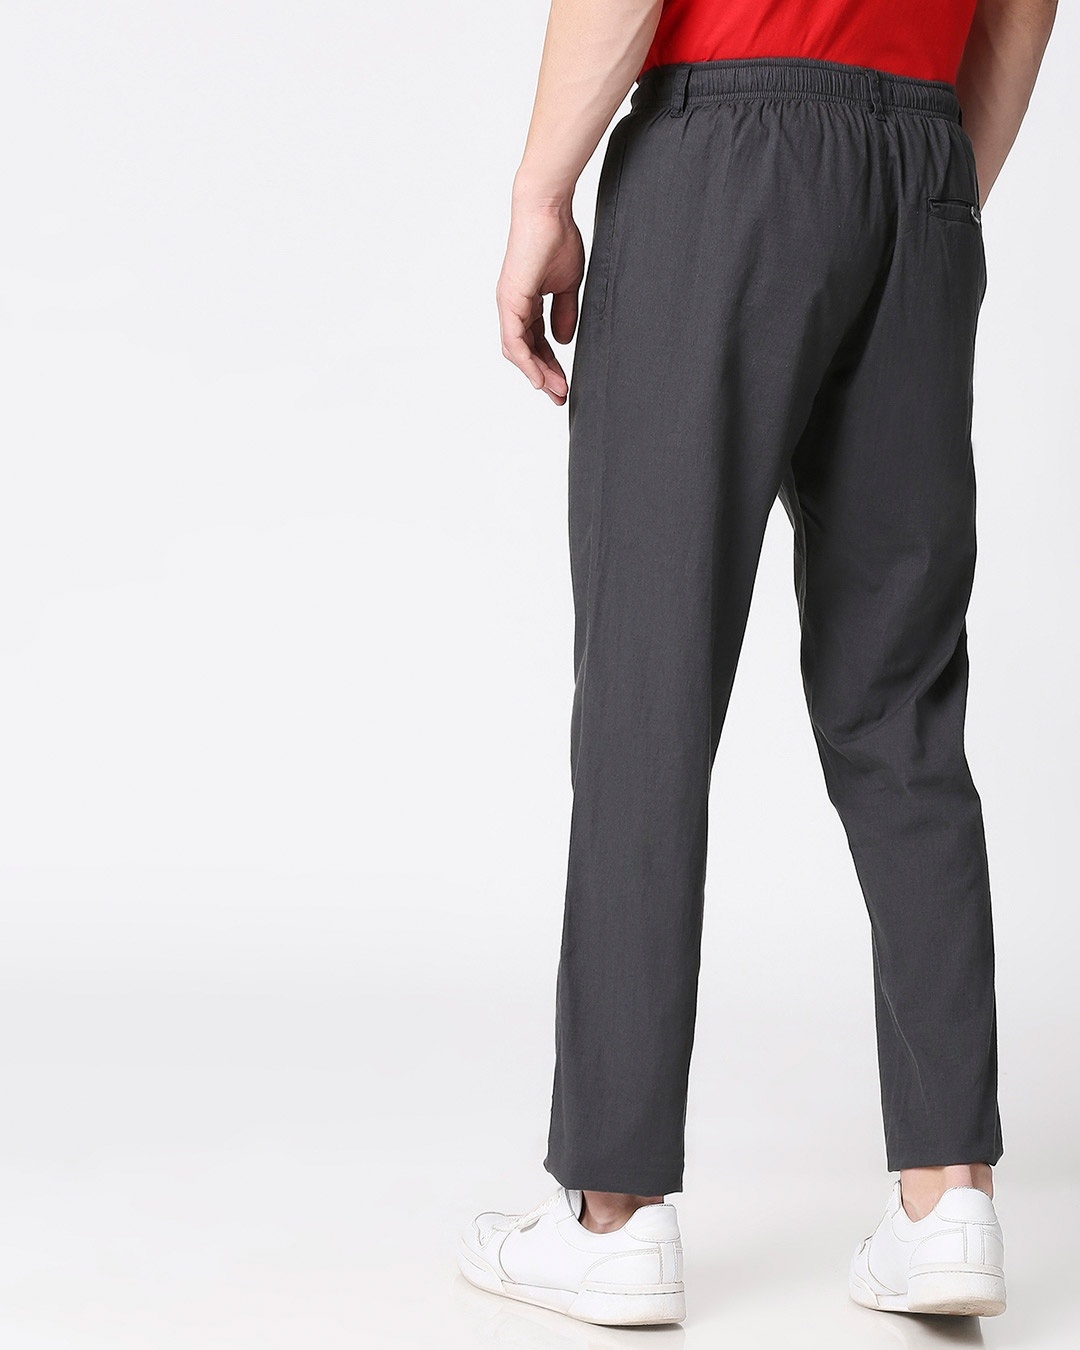 Shop Charcoal Grey Casual Cotton Trouser-Full